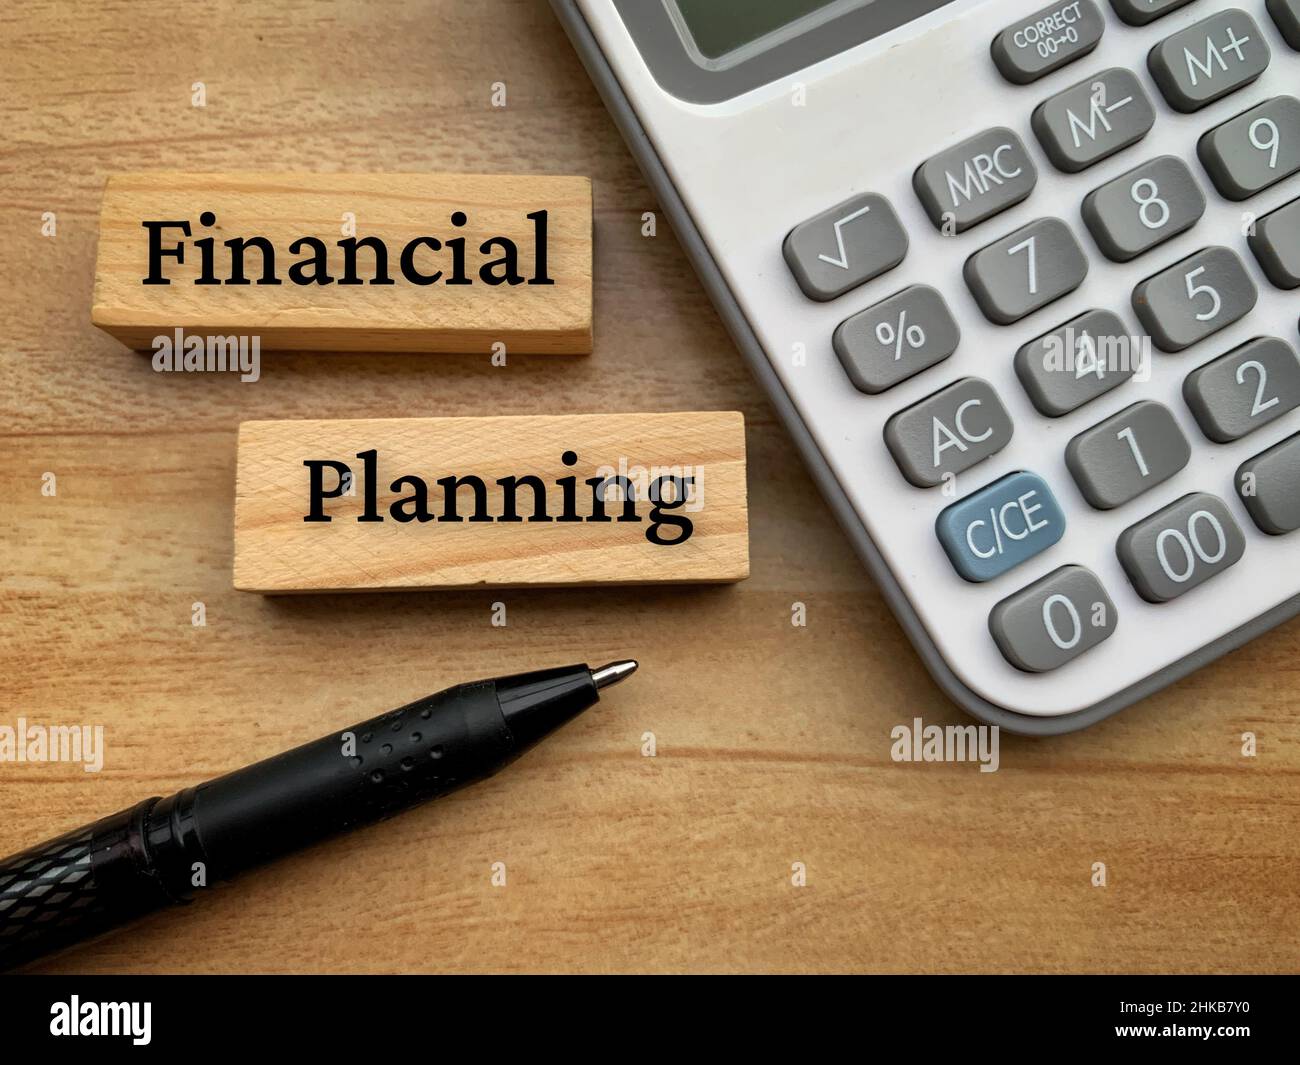 Financial planning text on wooden blocks with calculator and pen background. Stock Photo